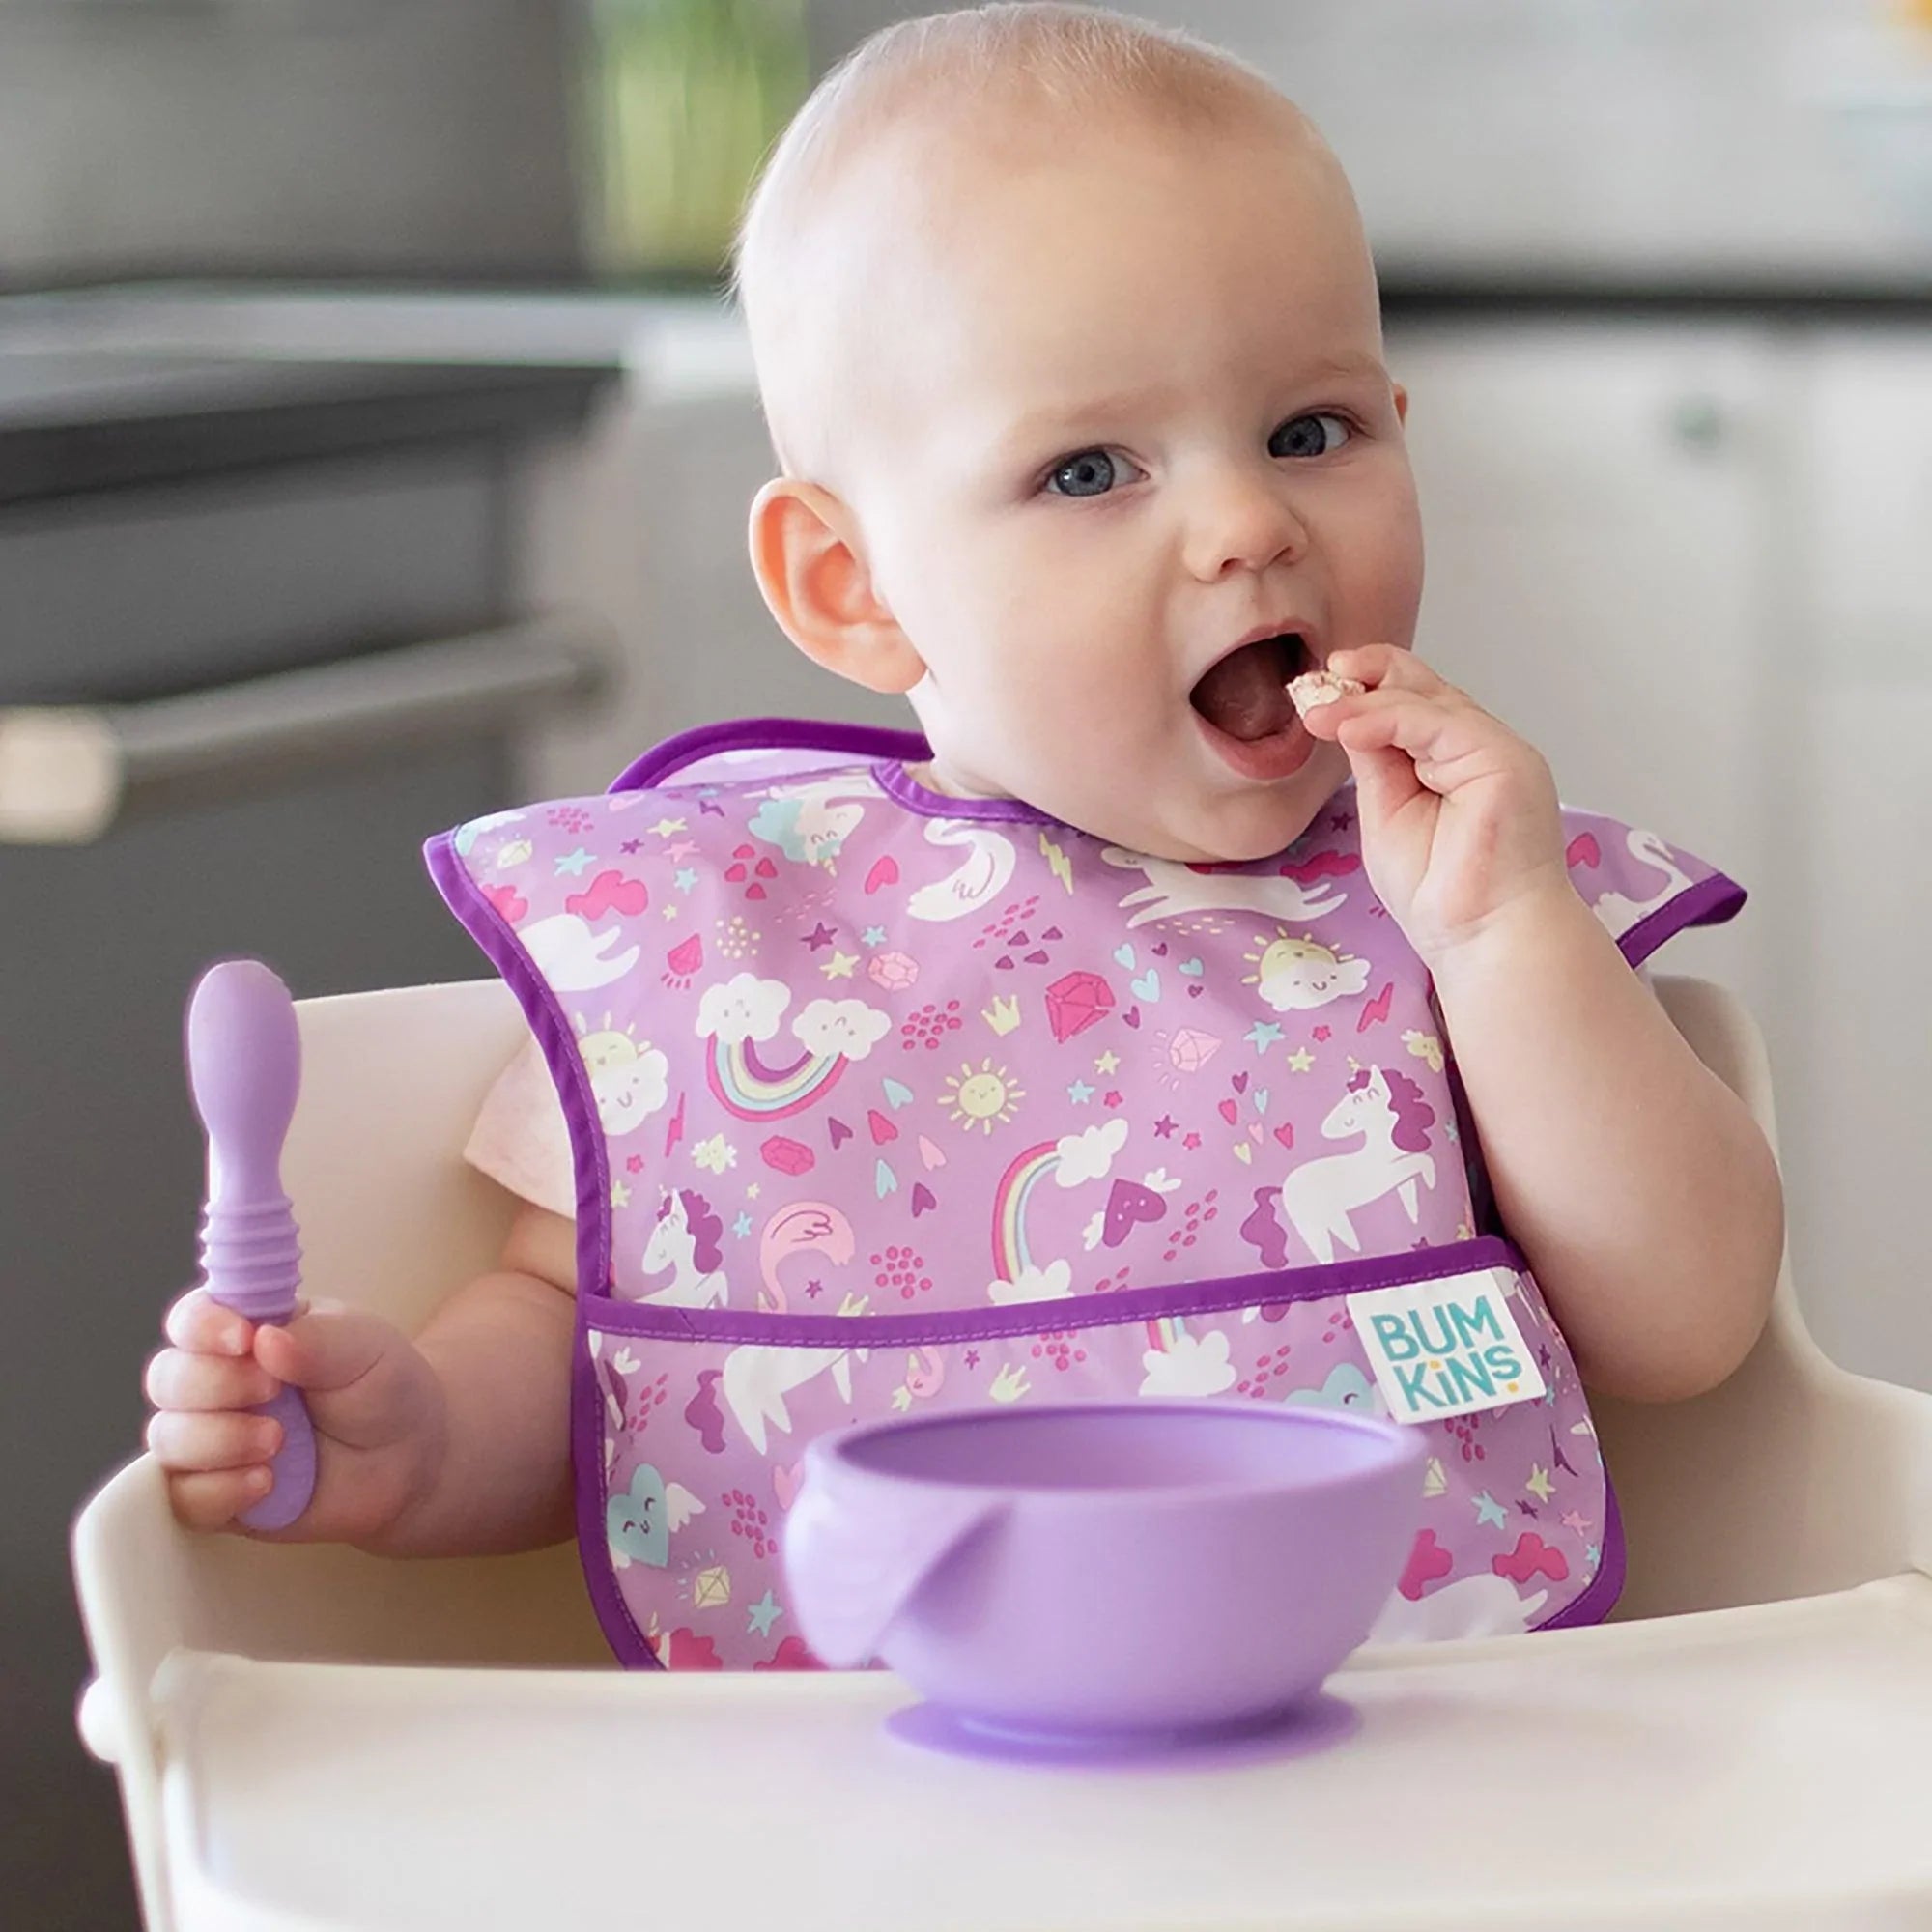 Silicone Baby Feeding Set for First Foods in Clay | Bumkins